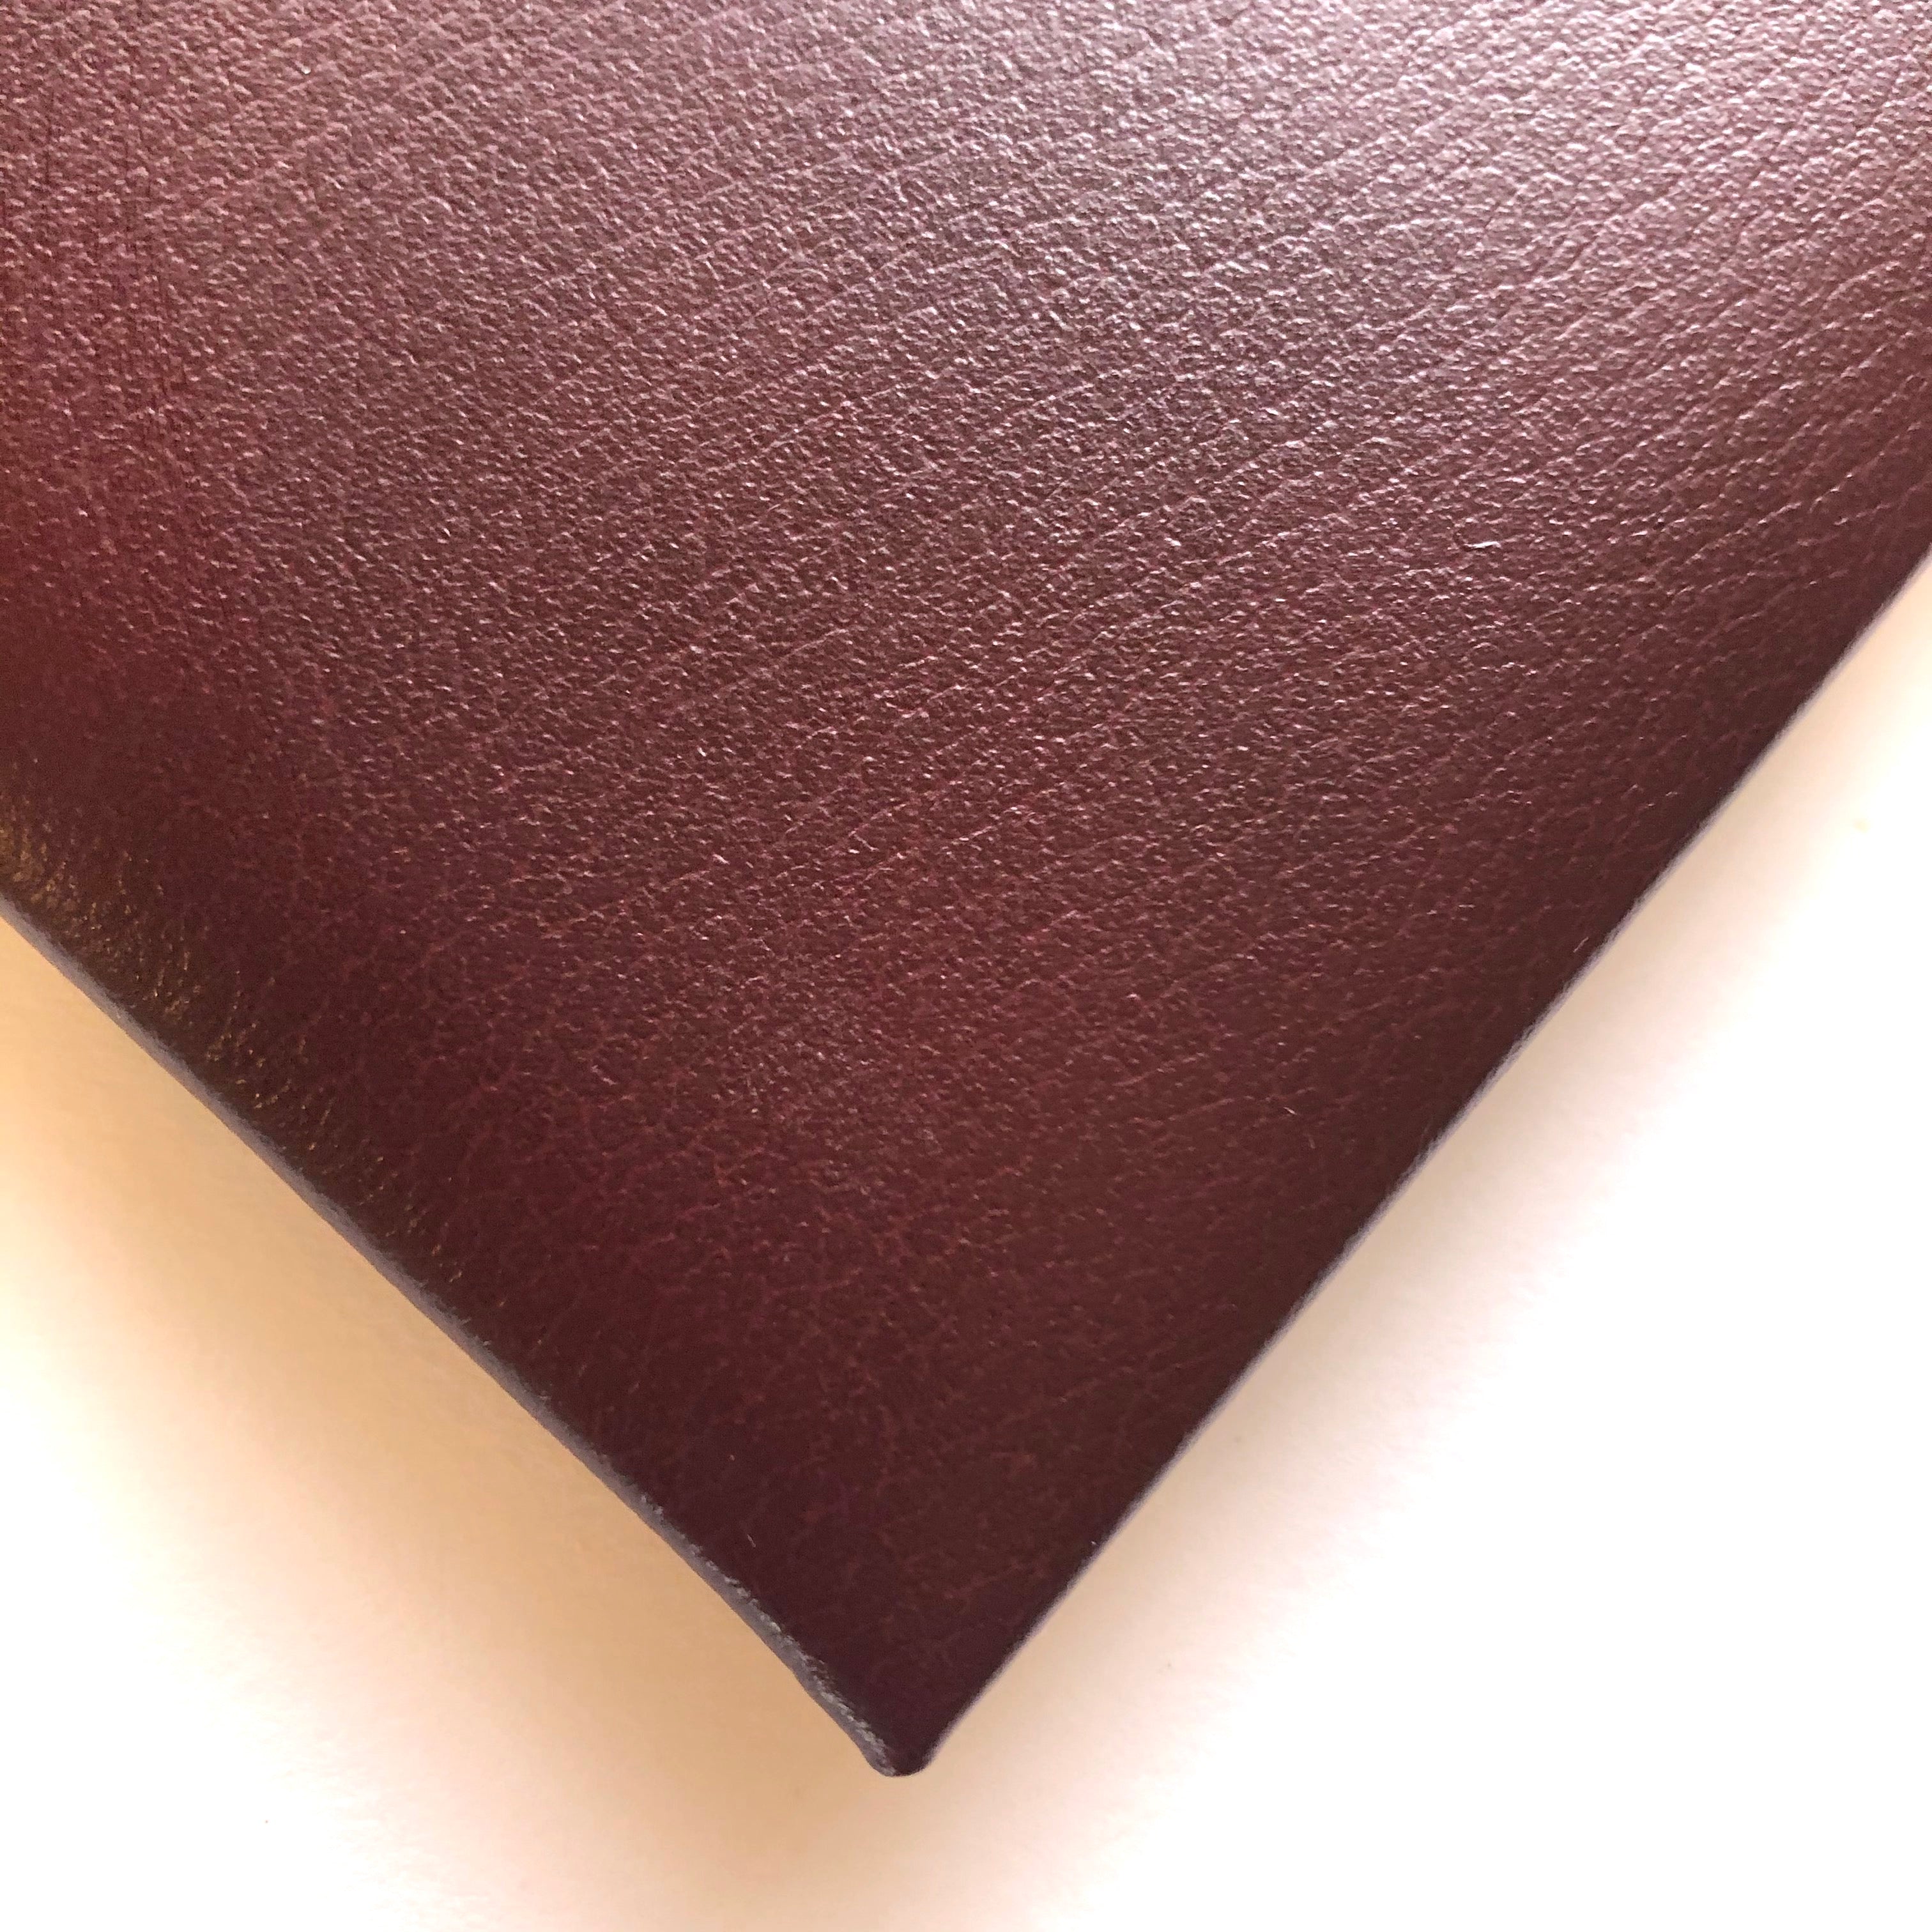 Swatch of Burgundy Leather Visitors Book